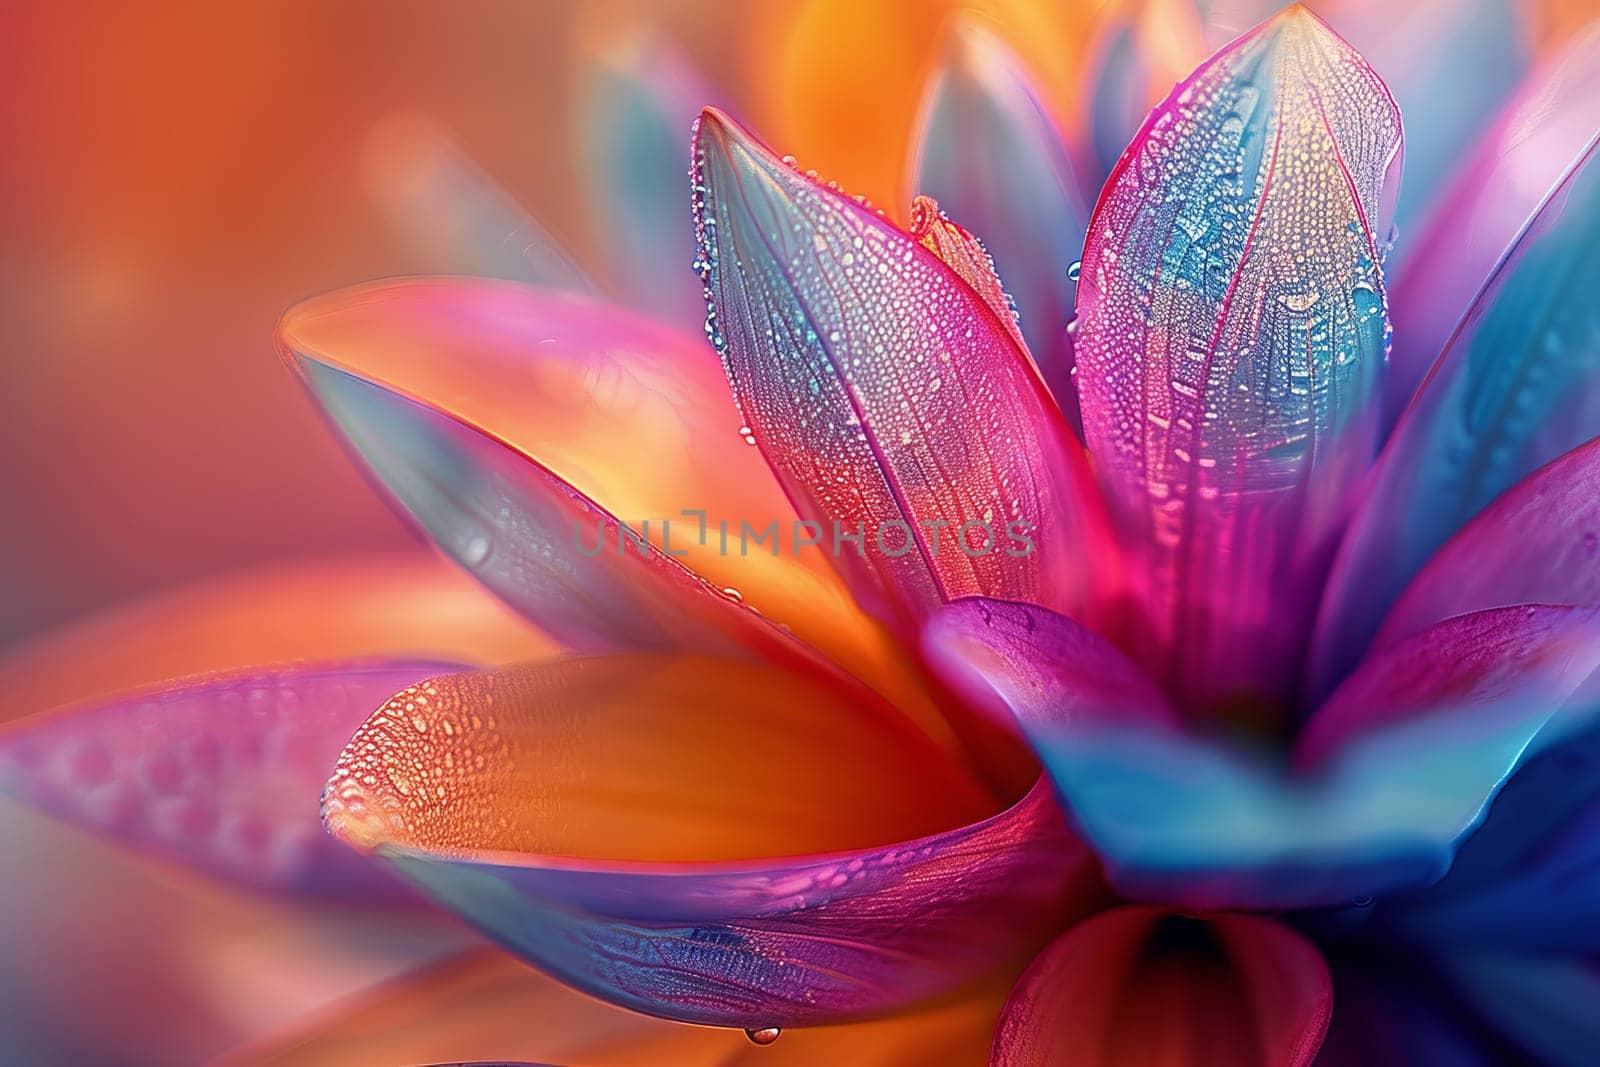 A colorful flower with droplets of water on it. The flower is a mix of pink, blue, and yellow